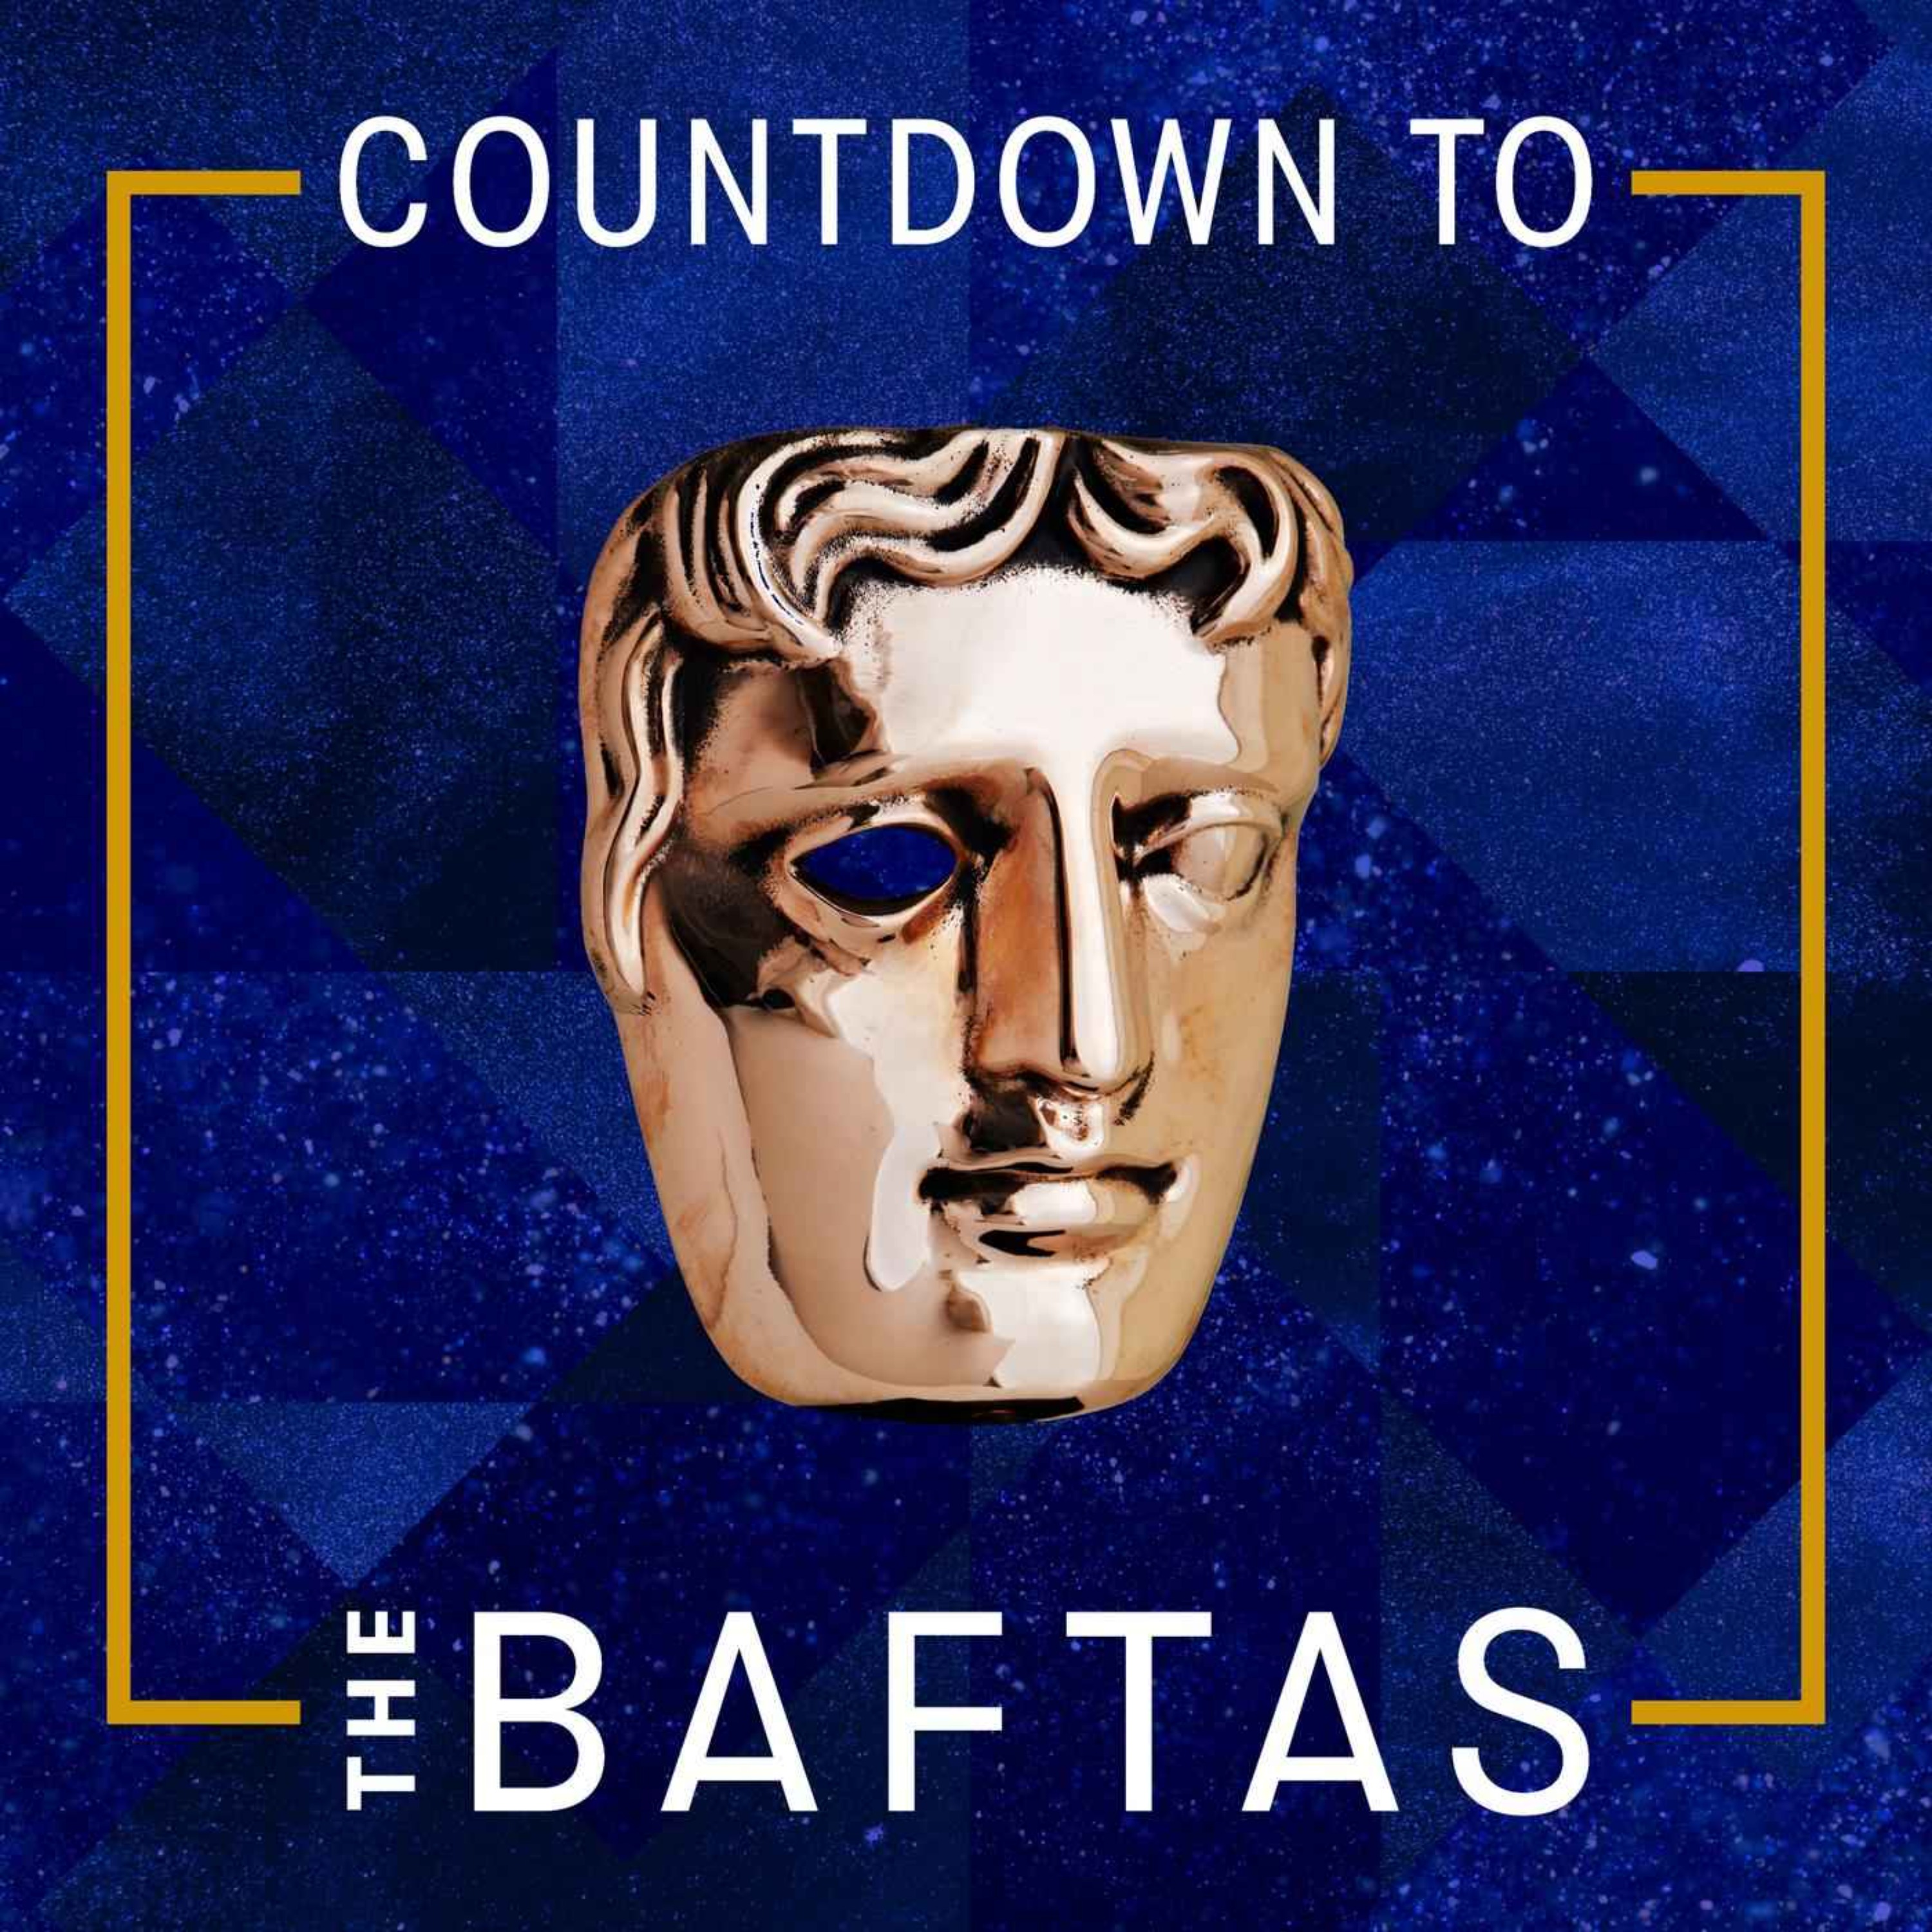 The BAFTAs are coming...